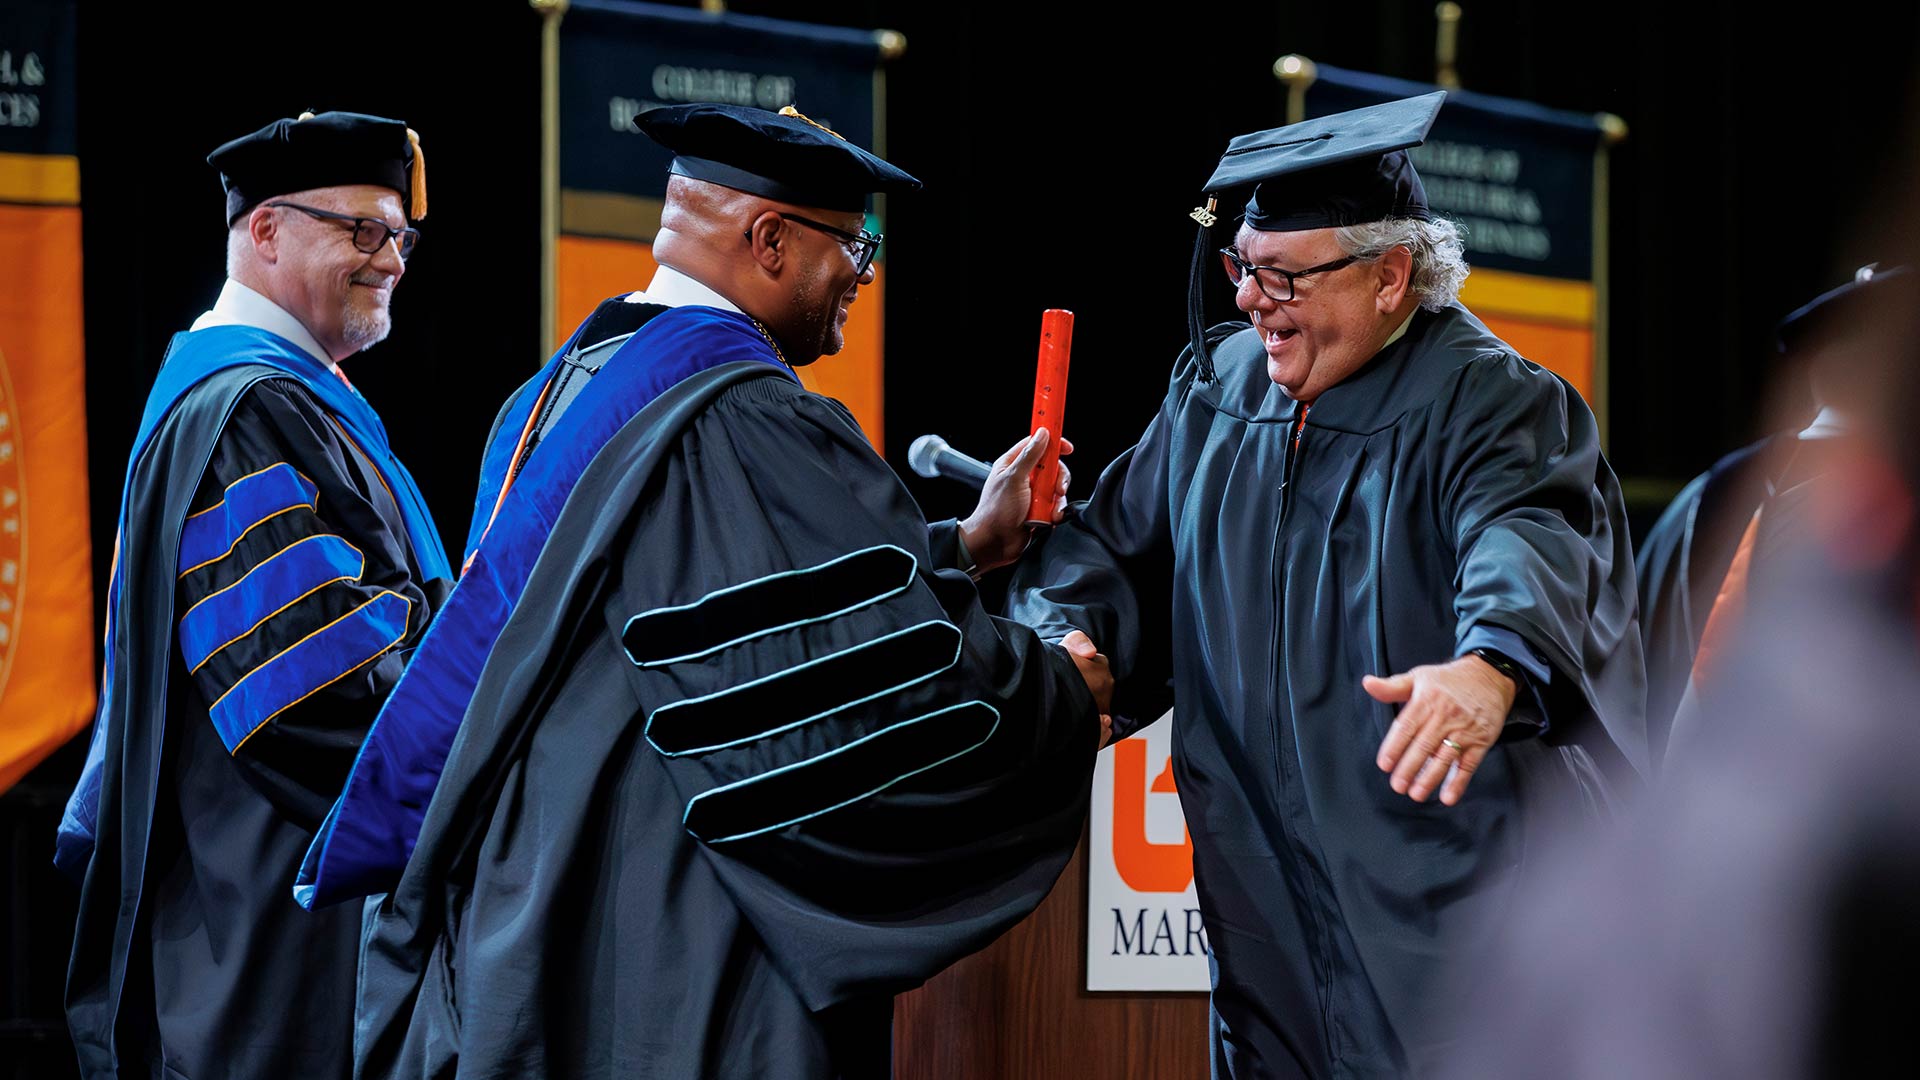 Yancy Freeman congratulates Hal Bynum on earning his UT Martin degree during Freeman’s first commencement as chancellor. Looking on is Philip Acree Cavalier, provost and senior vice chancellor for academic affairs.